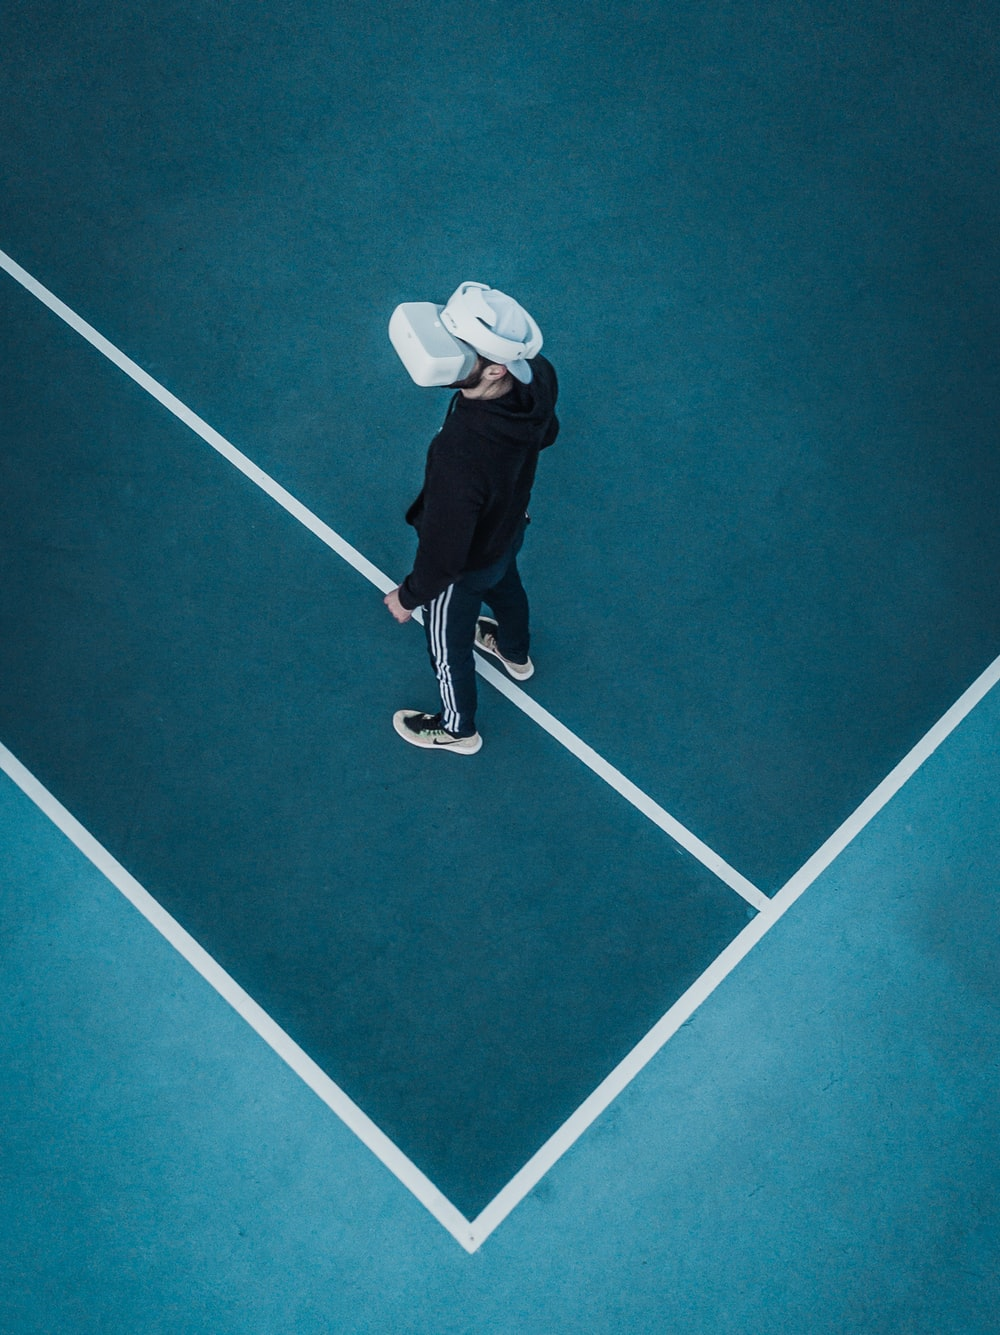 A sports bettor wearing a VR headset on a tennis court